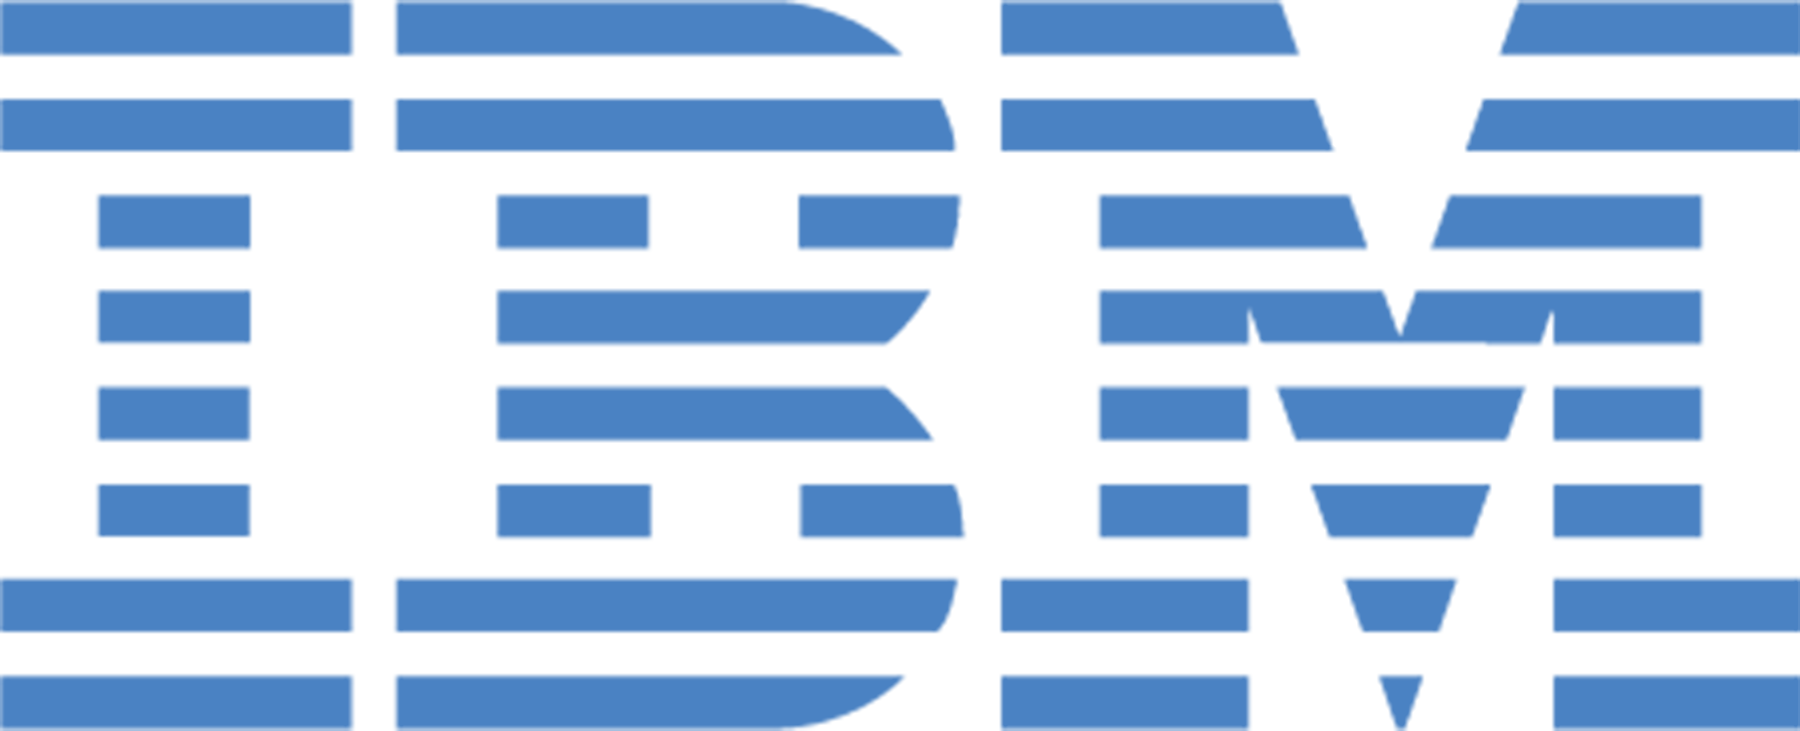 Latest IBM Logo - Quad9 DNS: Internet Security and Privacy in a Few Easy Steps